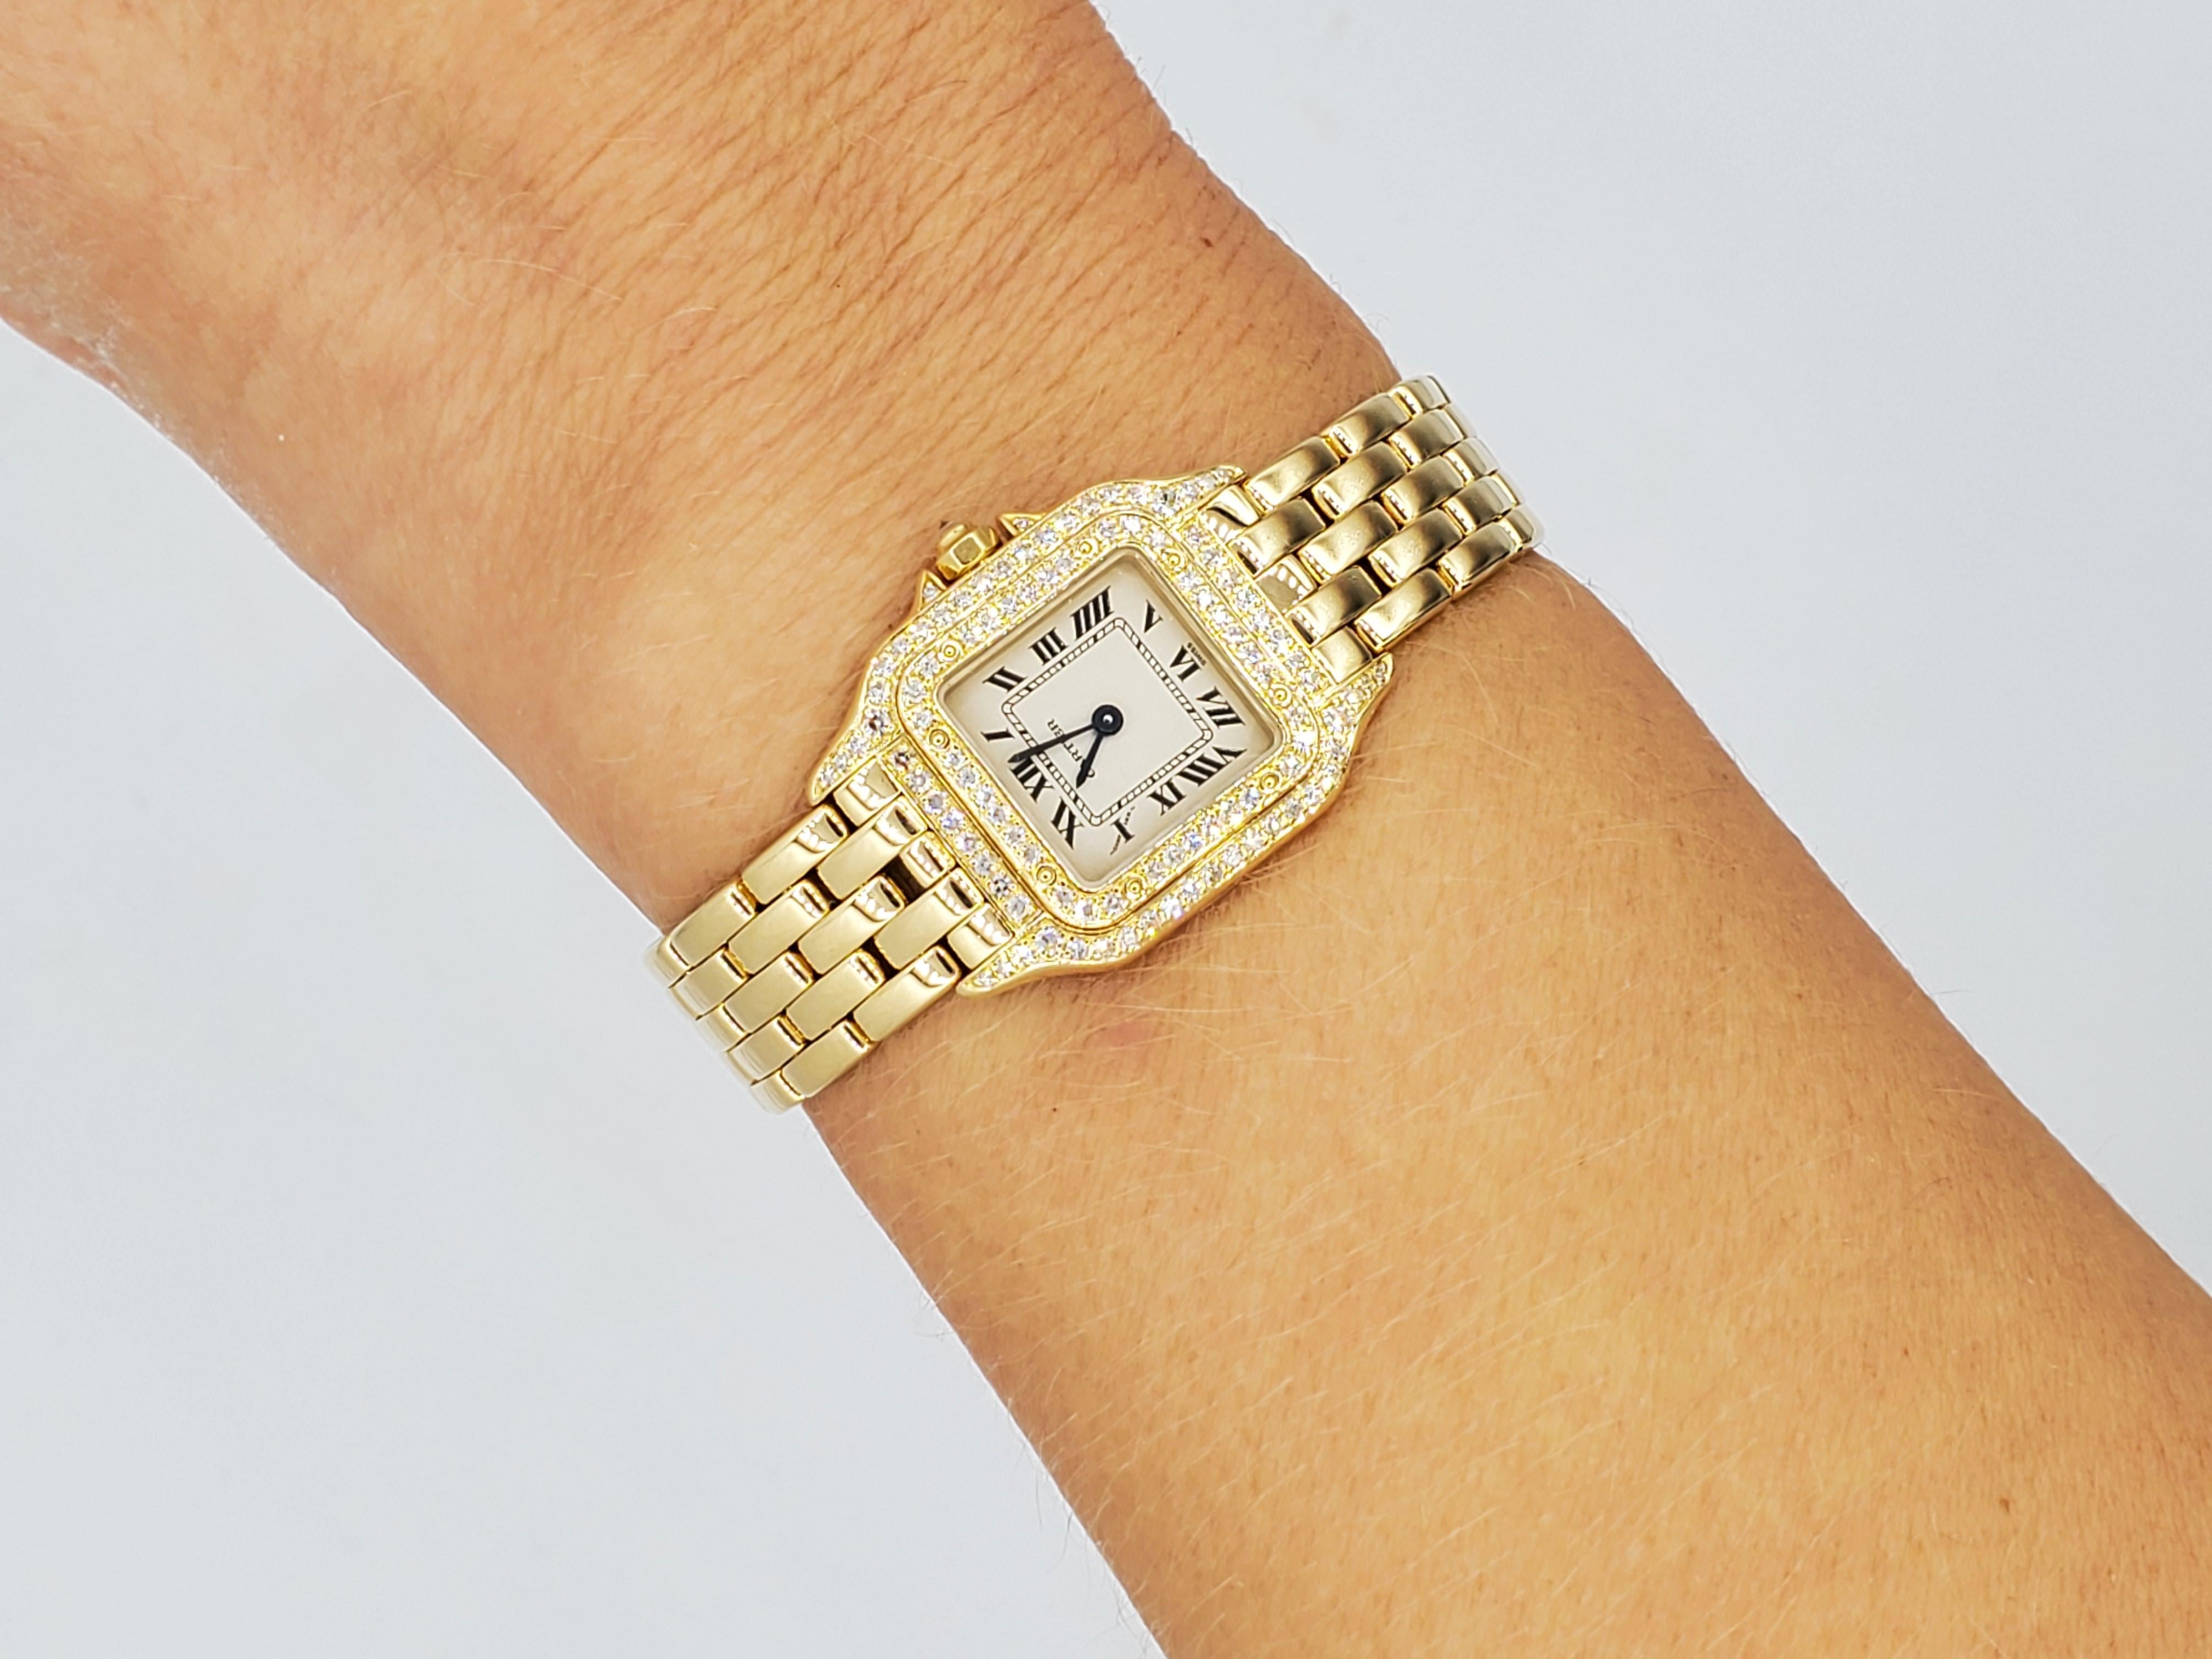 Cartier ladies 18kt yellow gold Panthere watch with single cut diamonds of approximately 1.00cttw. The diamonds are f/g color and vs clarity. Versatile champagne face. 69 grams total weight. The bracelet is 2.75 inches on each side. The back of the